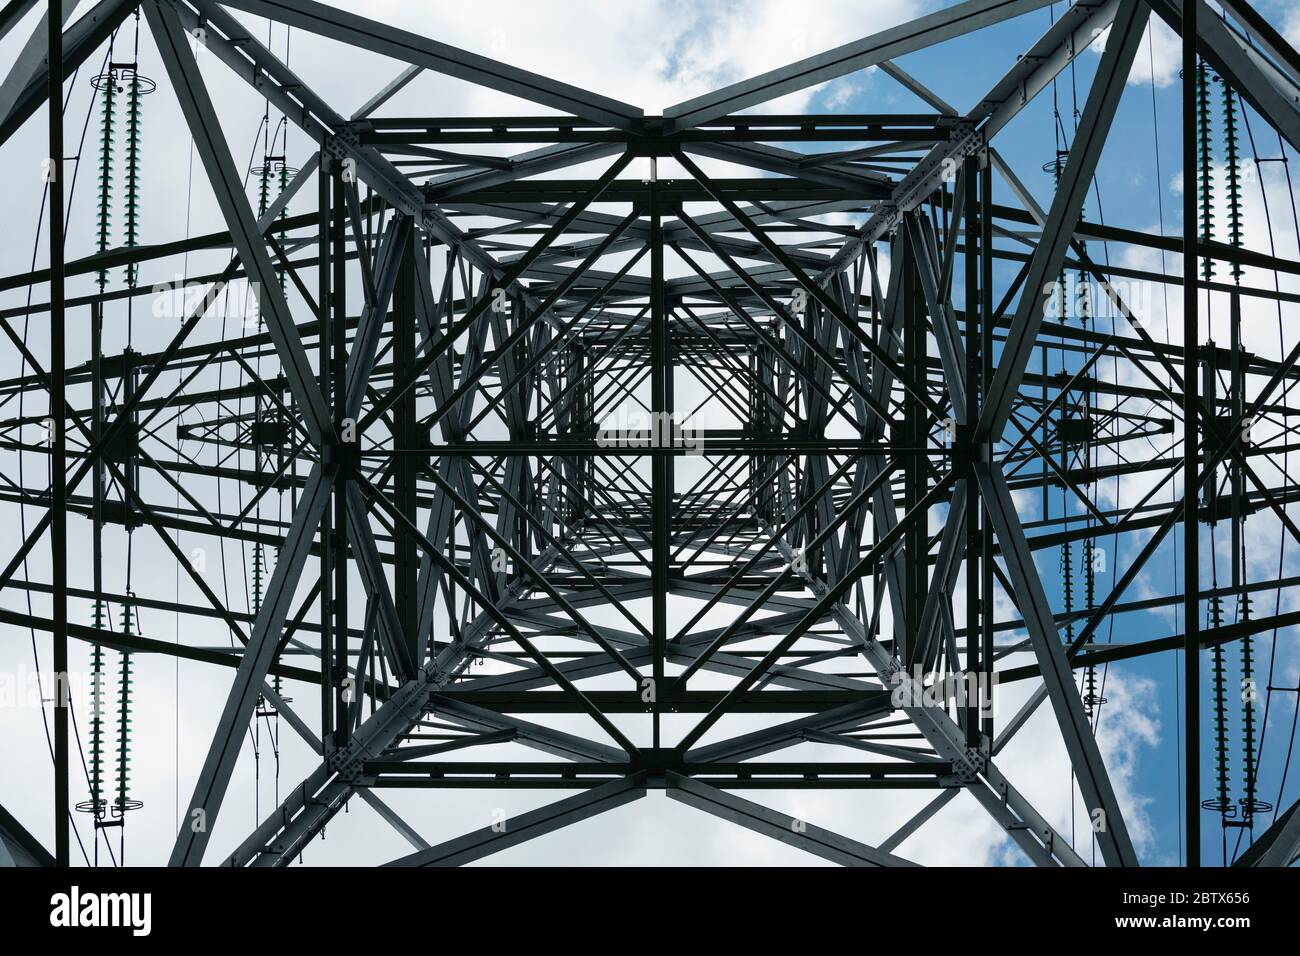 abstract view of electricity pole photographed from the bottom Stock Photo